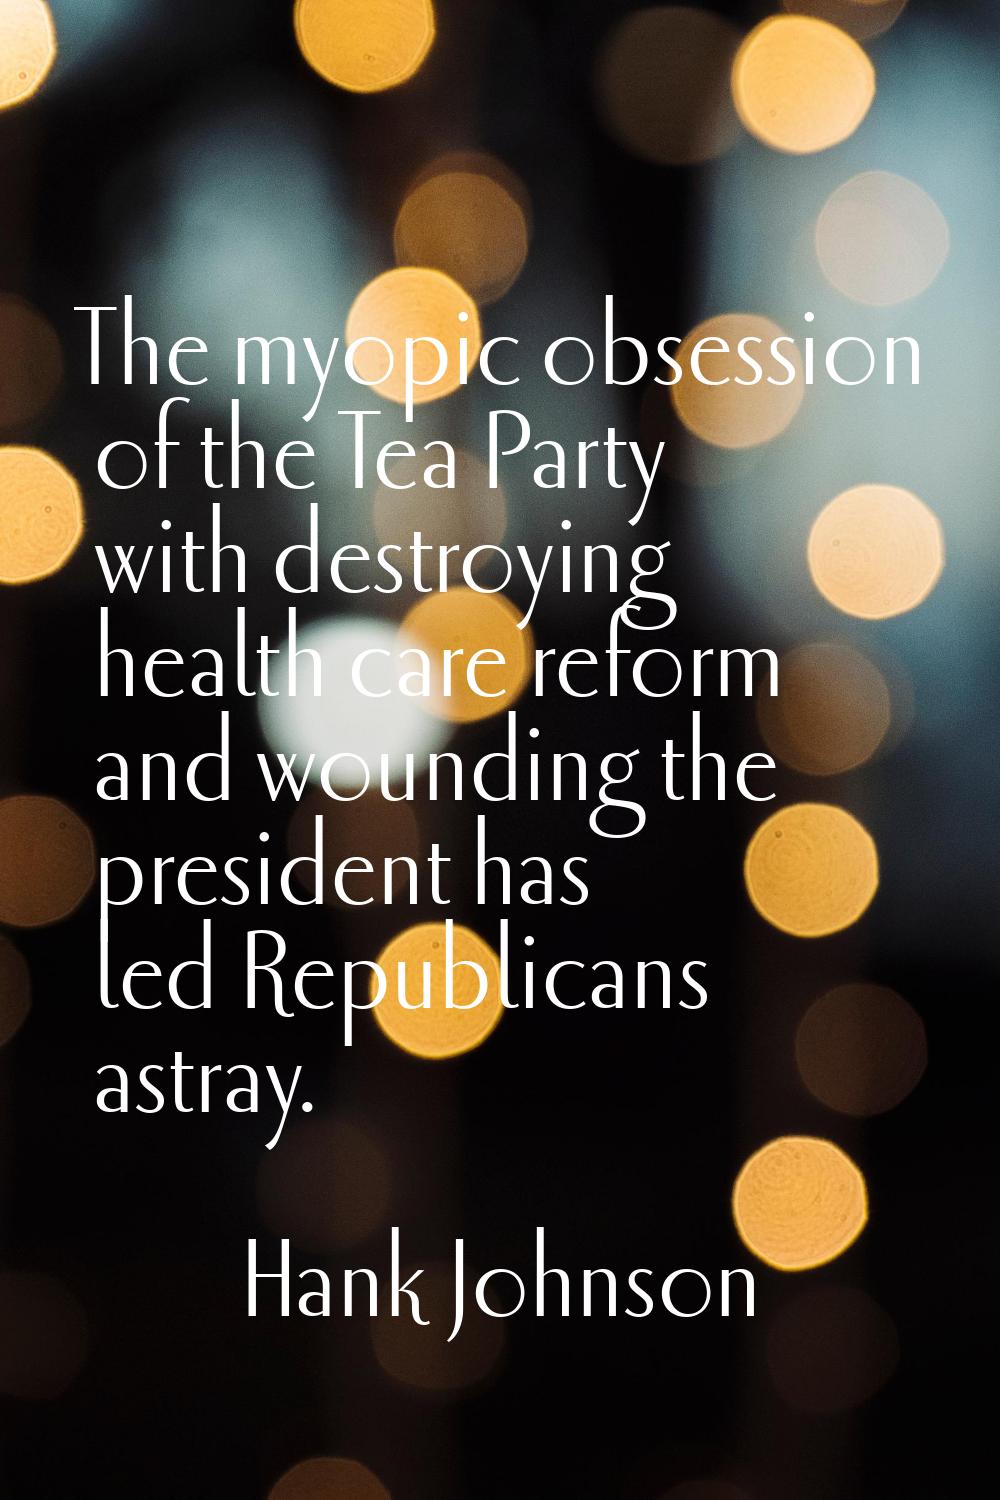 The myopic obsession of the Tea Party with destroying health care reform and wounding the president